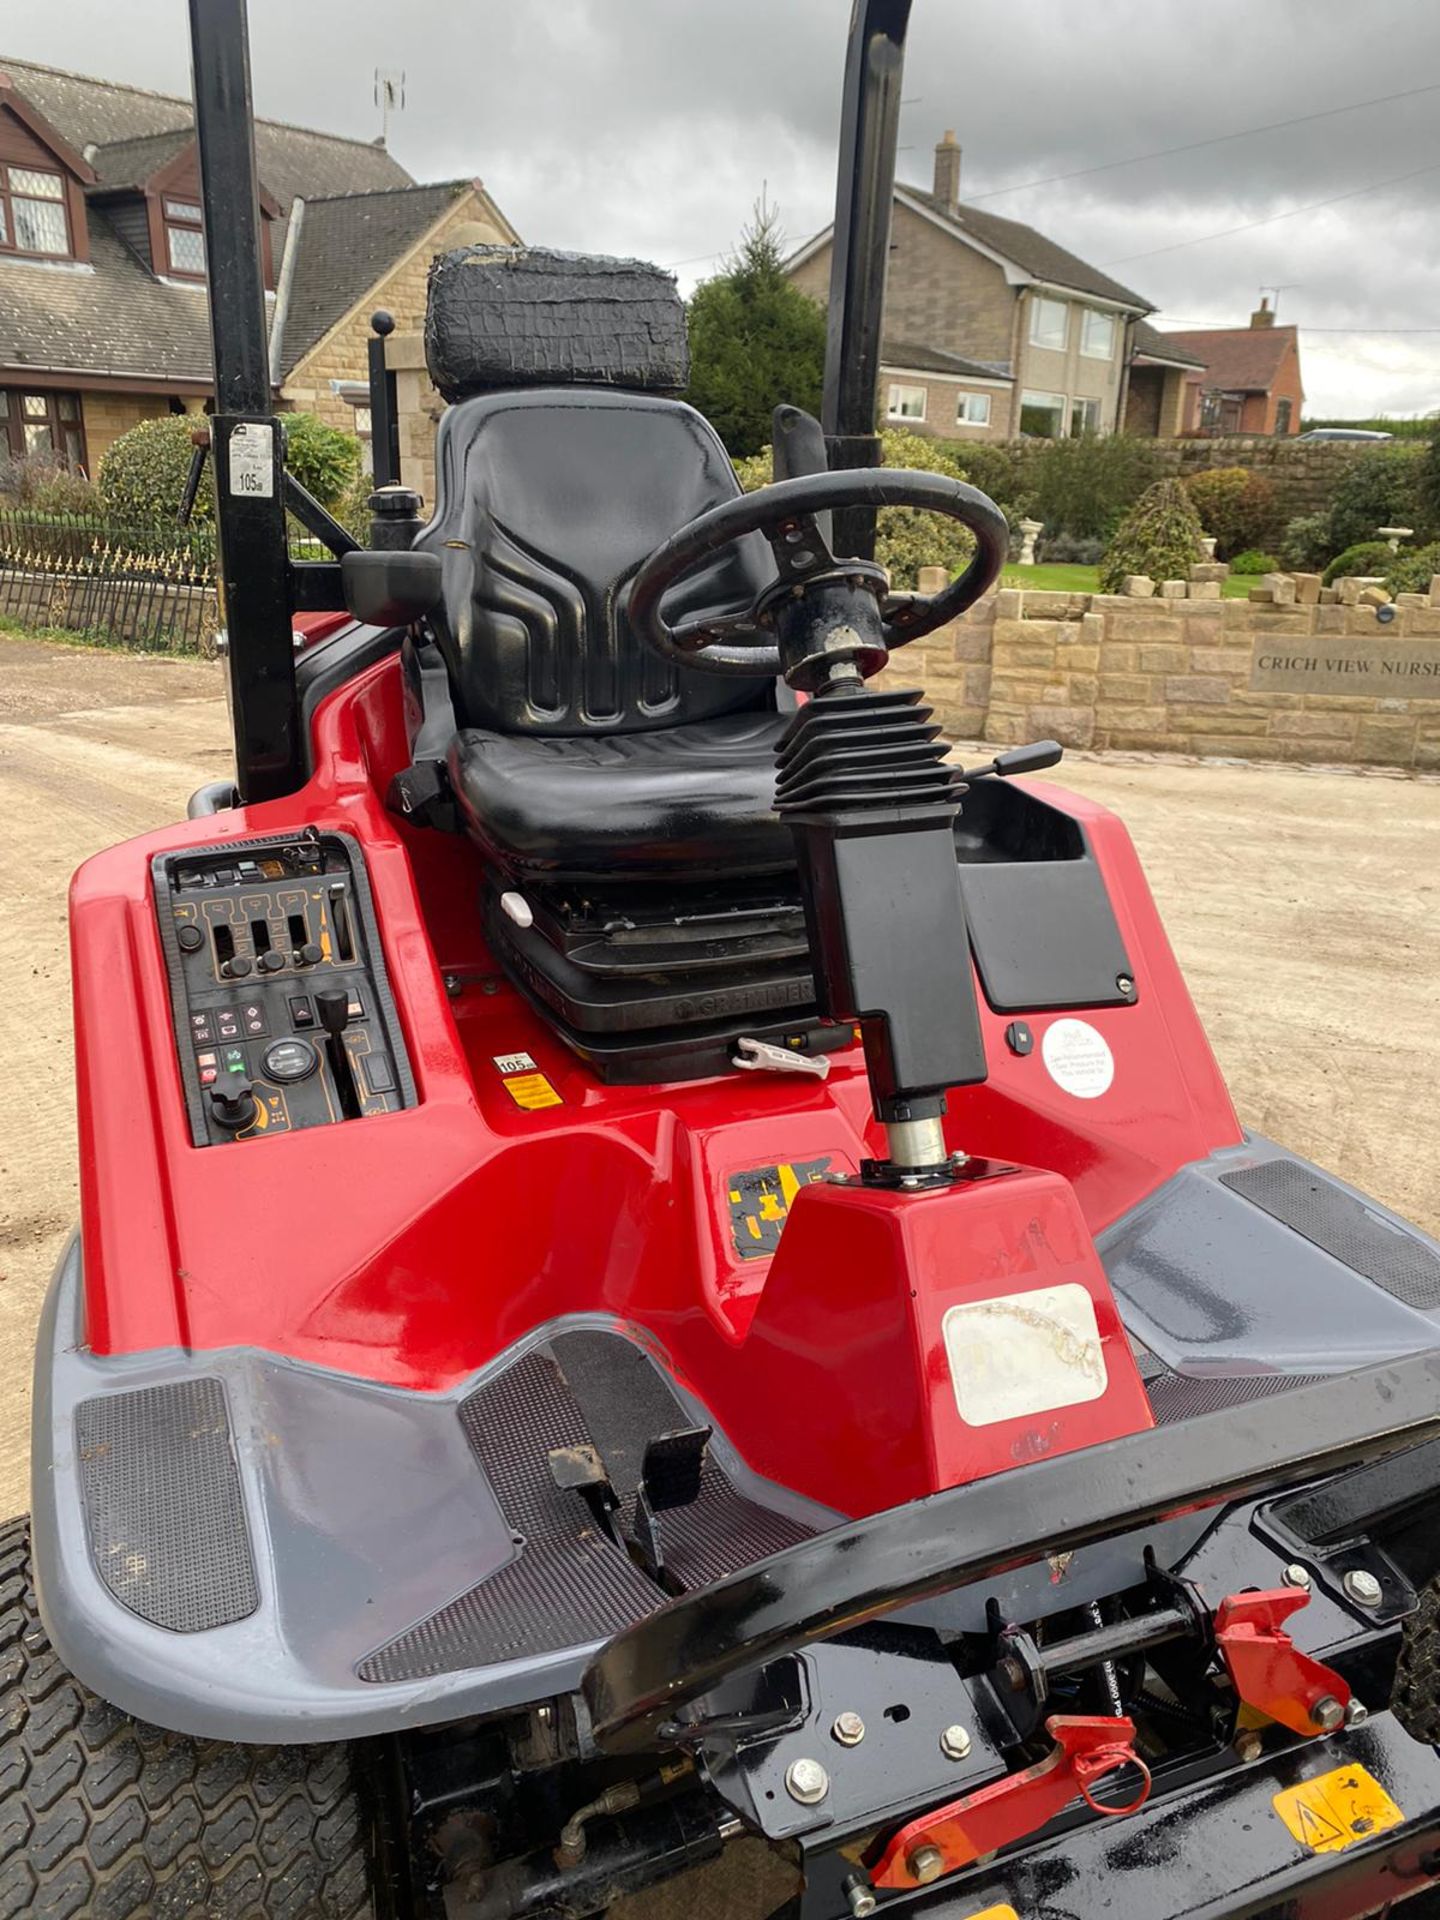 TORO LT3240 RIDE ON LAWN MOWER, 2012 ROAD REGISTERED, 4 WHEEL DRIVE, VERY CLEAN CONDITION *PLUS VAT* - Image 5 of 6